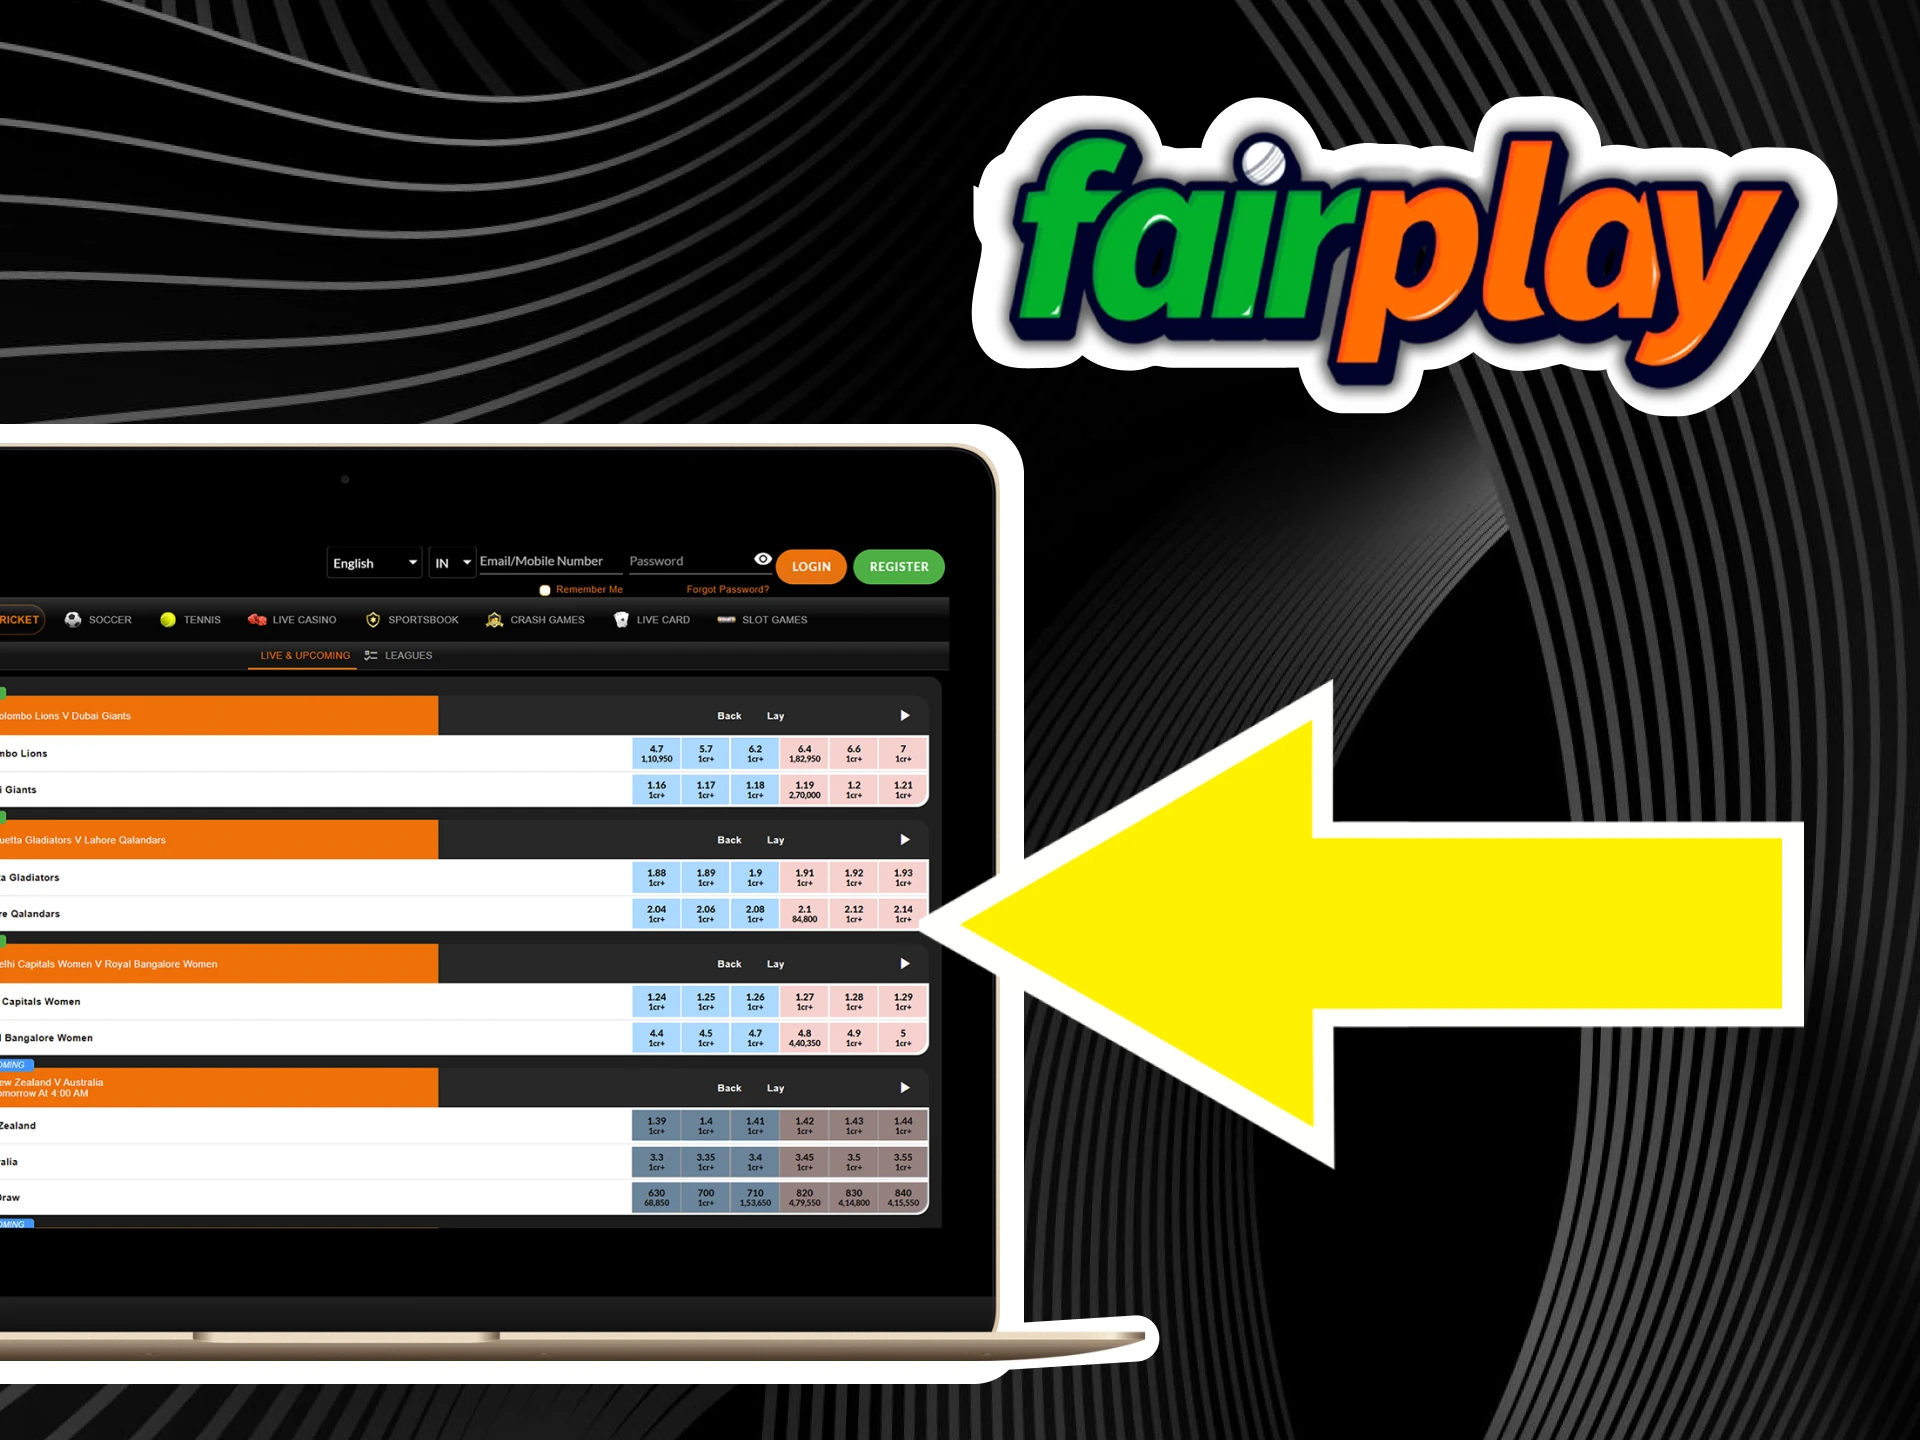 Choose a match and a team and place a bet on Fairplay.